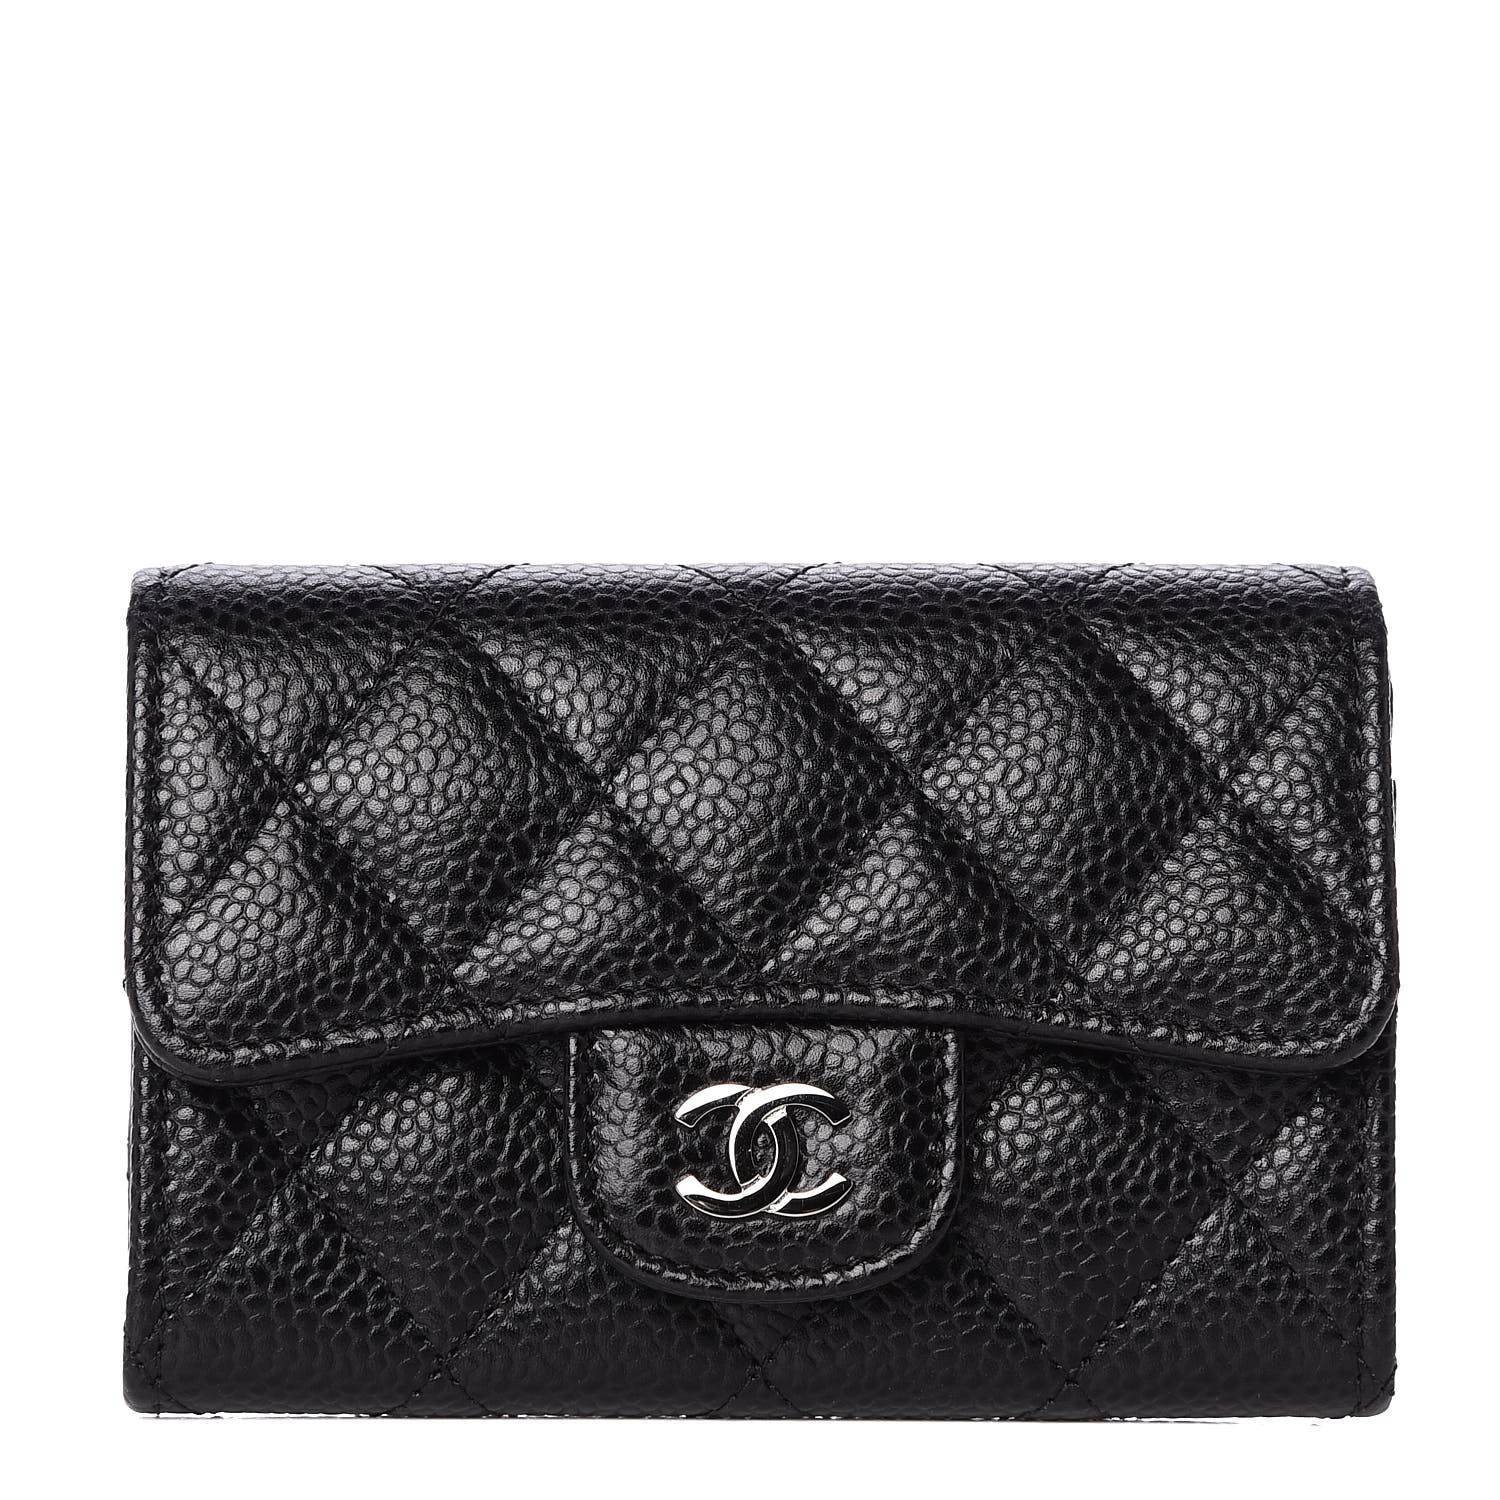 CHANEL Caviar Quilted Flap Card Holder Black 548564 | FASHIONPHILE